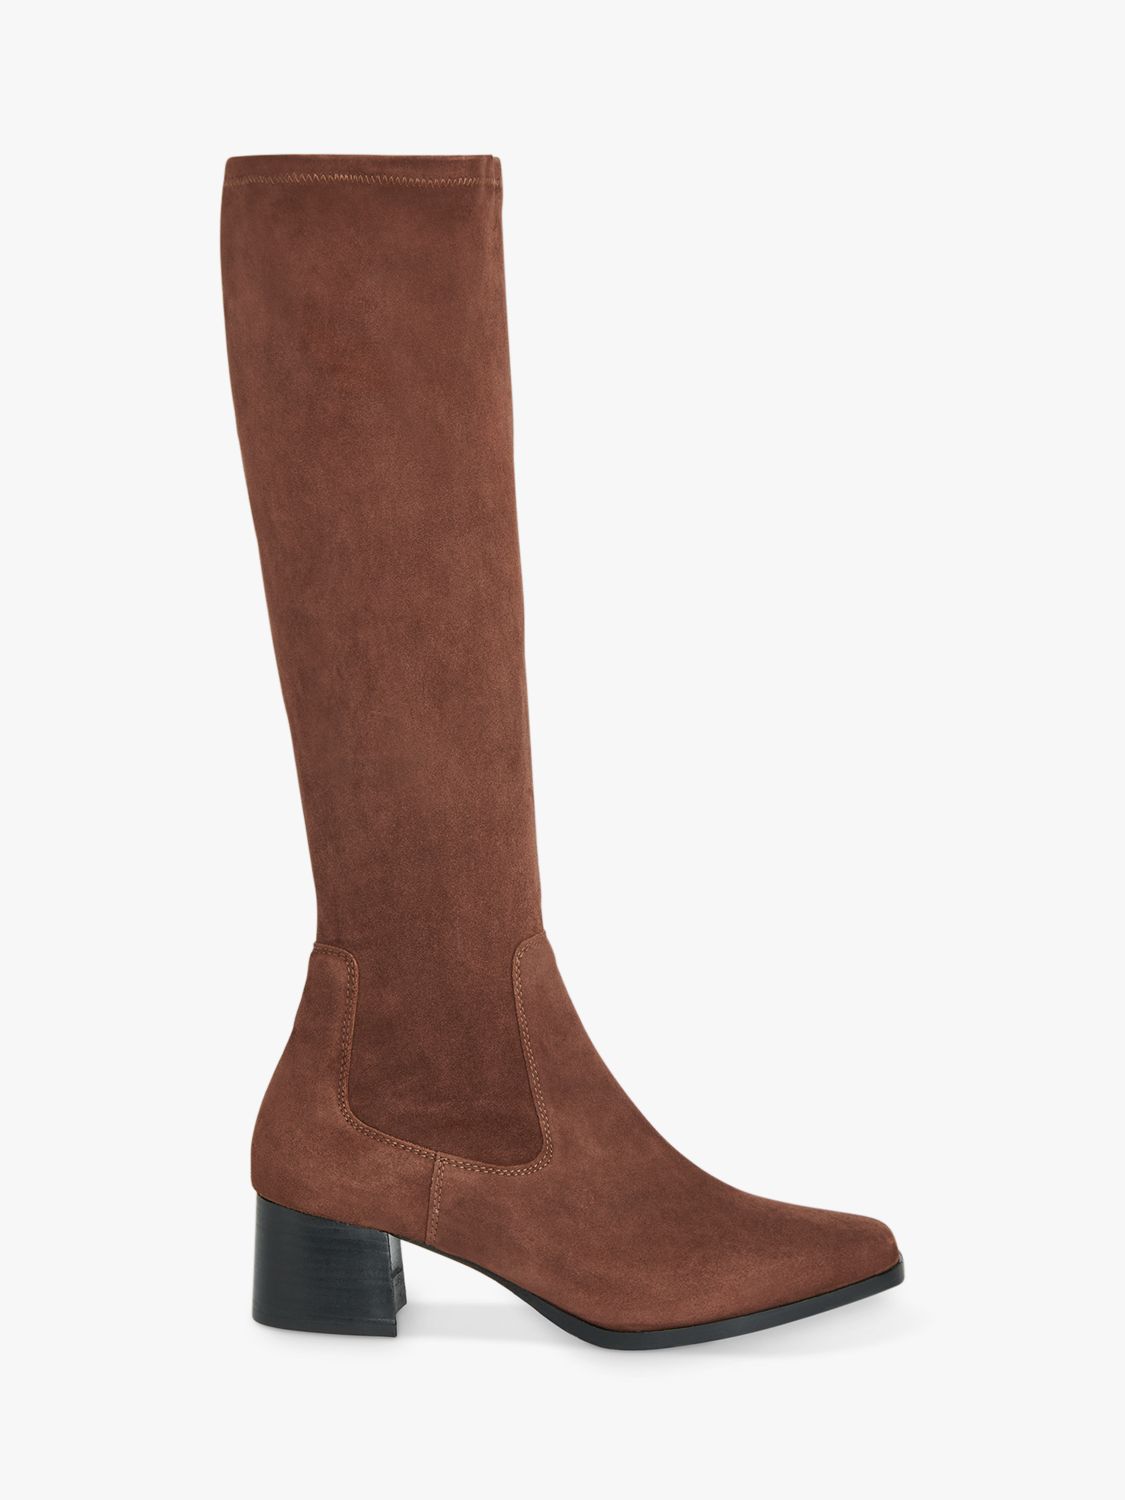 Whistles Blaire Stretch Knee High Suede Boots, Brown at John Lewis ...